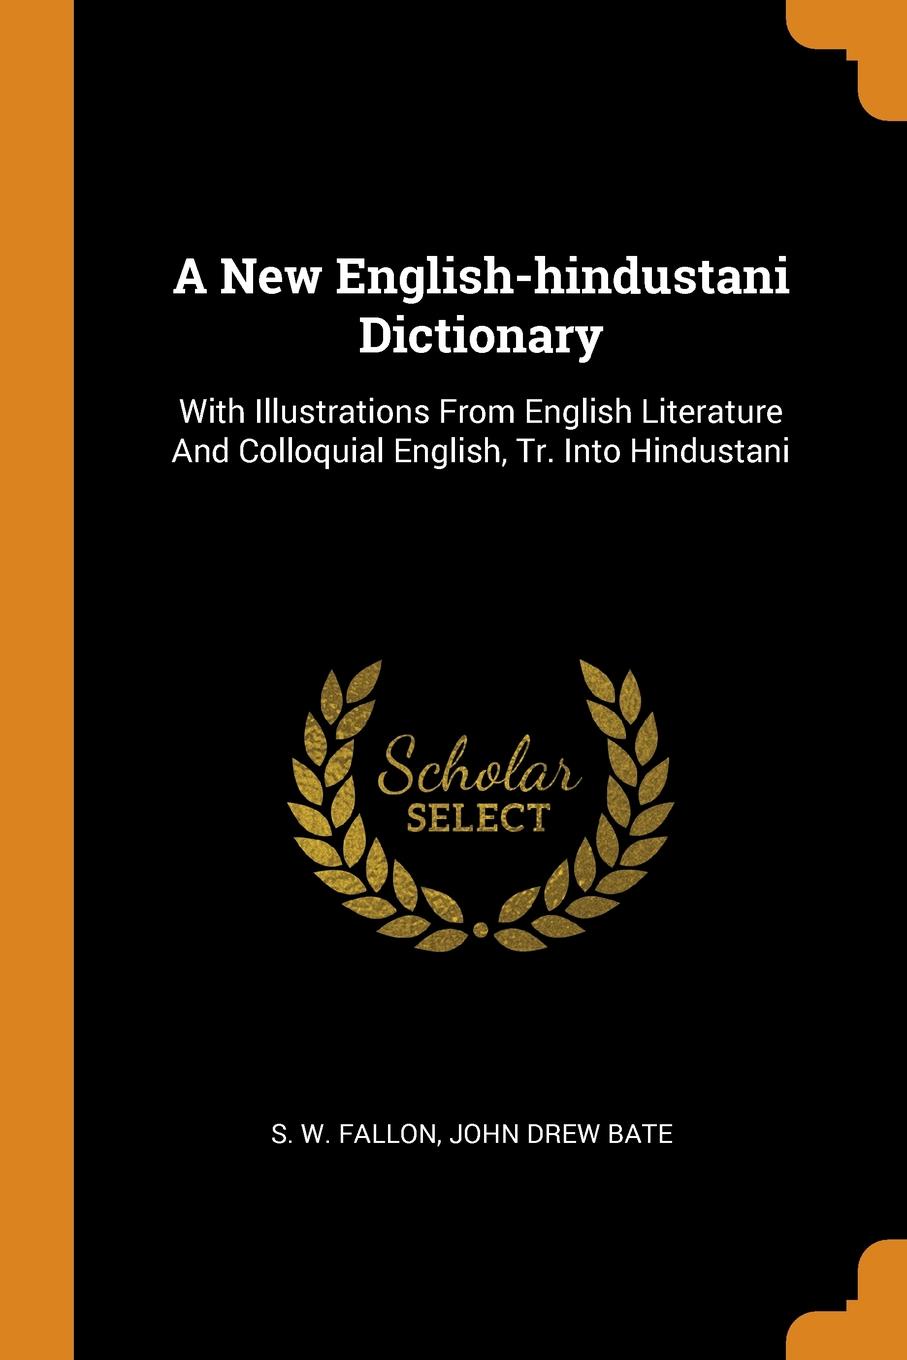 A New English-hindustani Dictionary. With Illustrations From English Literature And Colloquial English, Tr. Into Hindustani